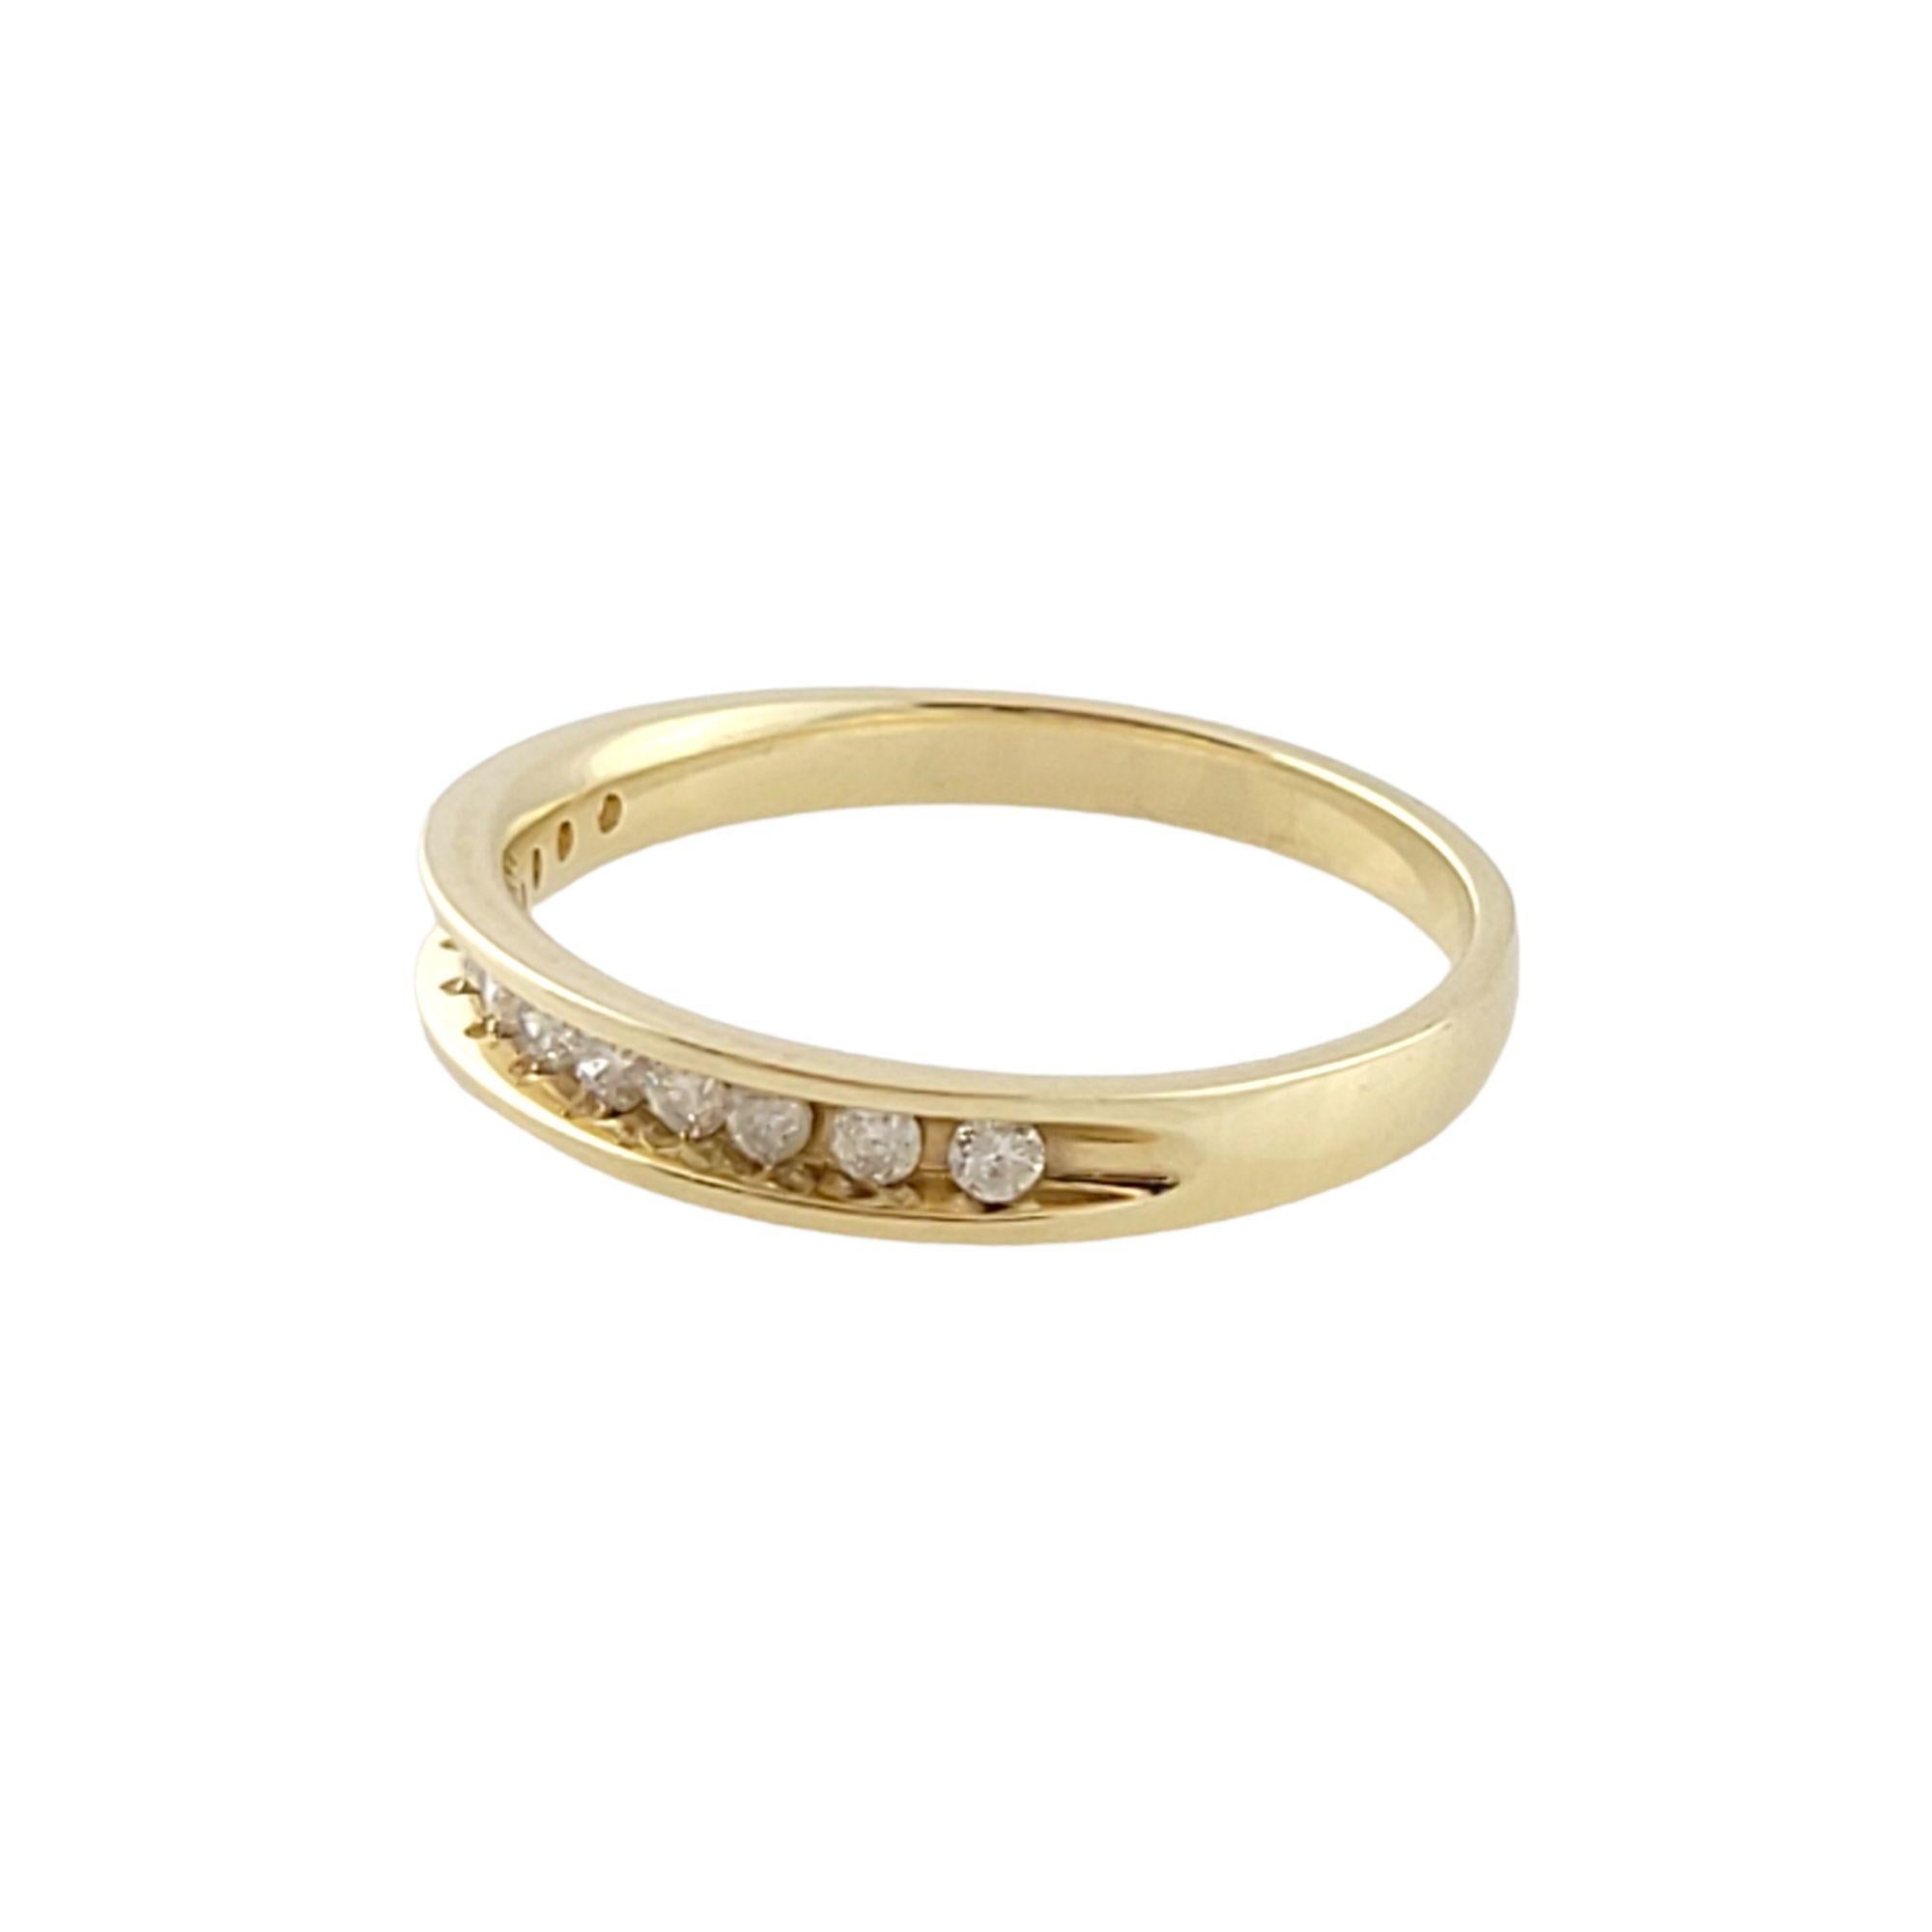 Vintage 10K Yellow Gold Diamond Band Size 7

12 sparkling round cut diamonds set in a gorgeous 10K yellow gold band!

Approximate total diamond weight: 0.22 cts

Diamond clarity: I1 - I2

Diamond color: I

Ring size: 7
Shank: 2mm

Weight: 1.8 g/ 1.1